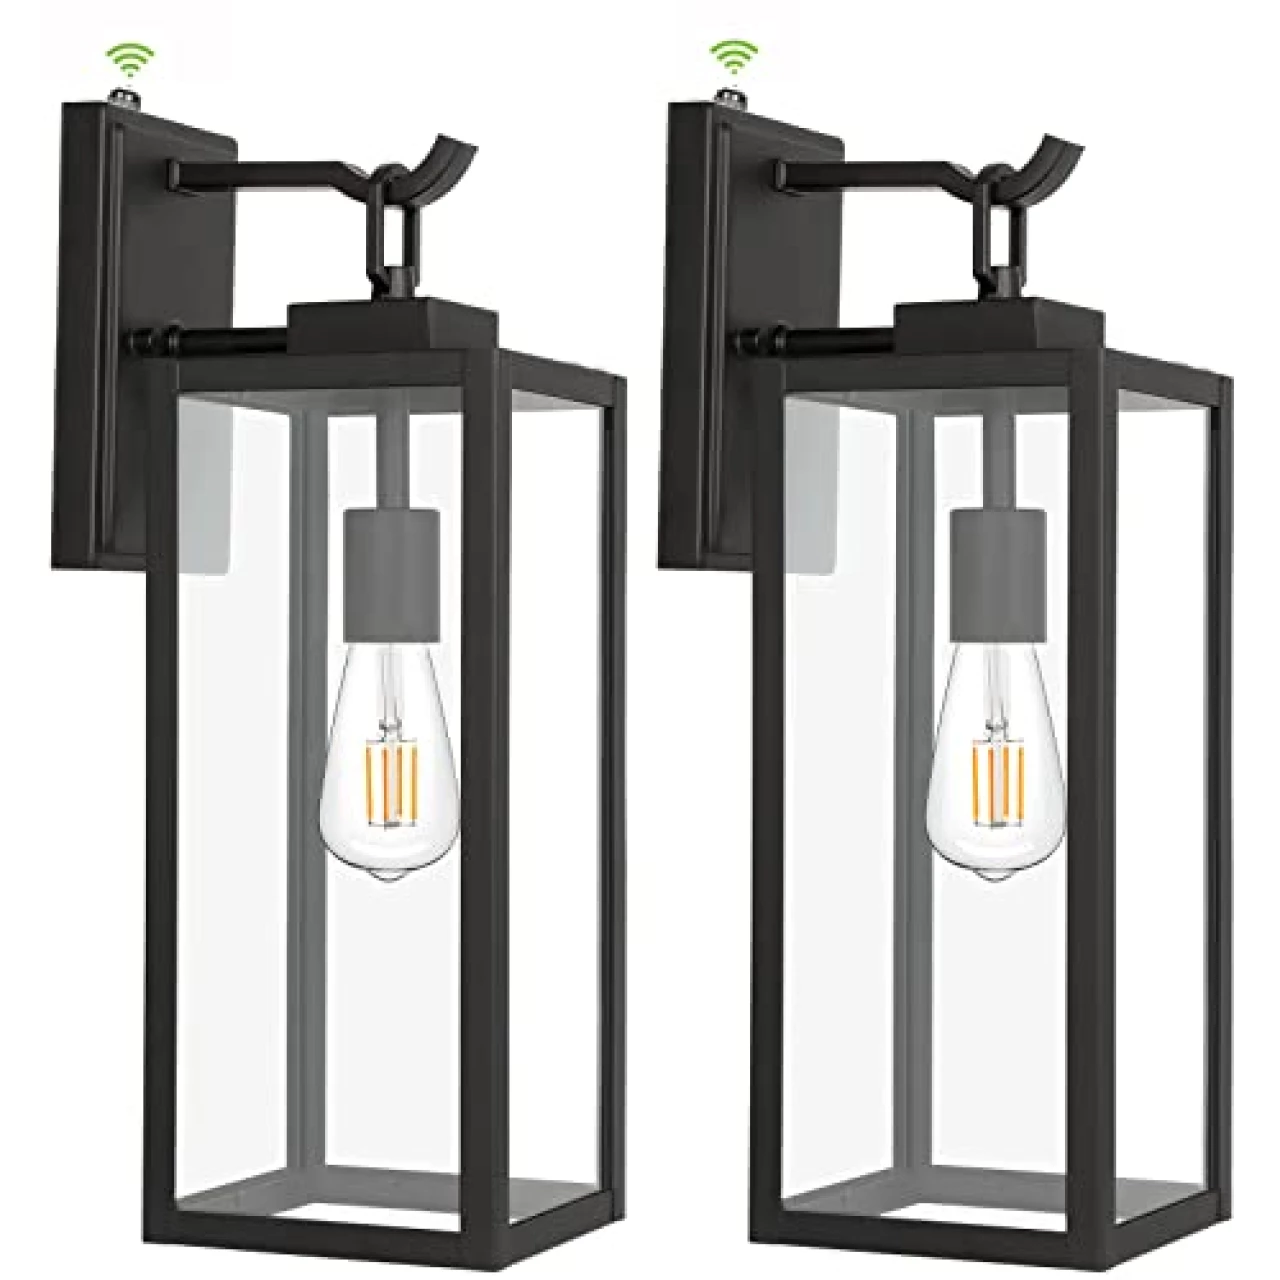 Hykolity Large Size Dusk to Dawn Outdoor Wall Lanterns, 18 Inch Matte Black Porch Lights, Exterior Wall Lighting, Anti-Rust Architectural Outdoor Sconces, ETL Listed, 2 Pack